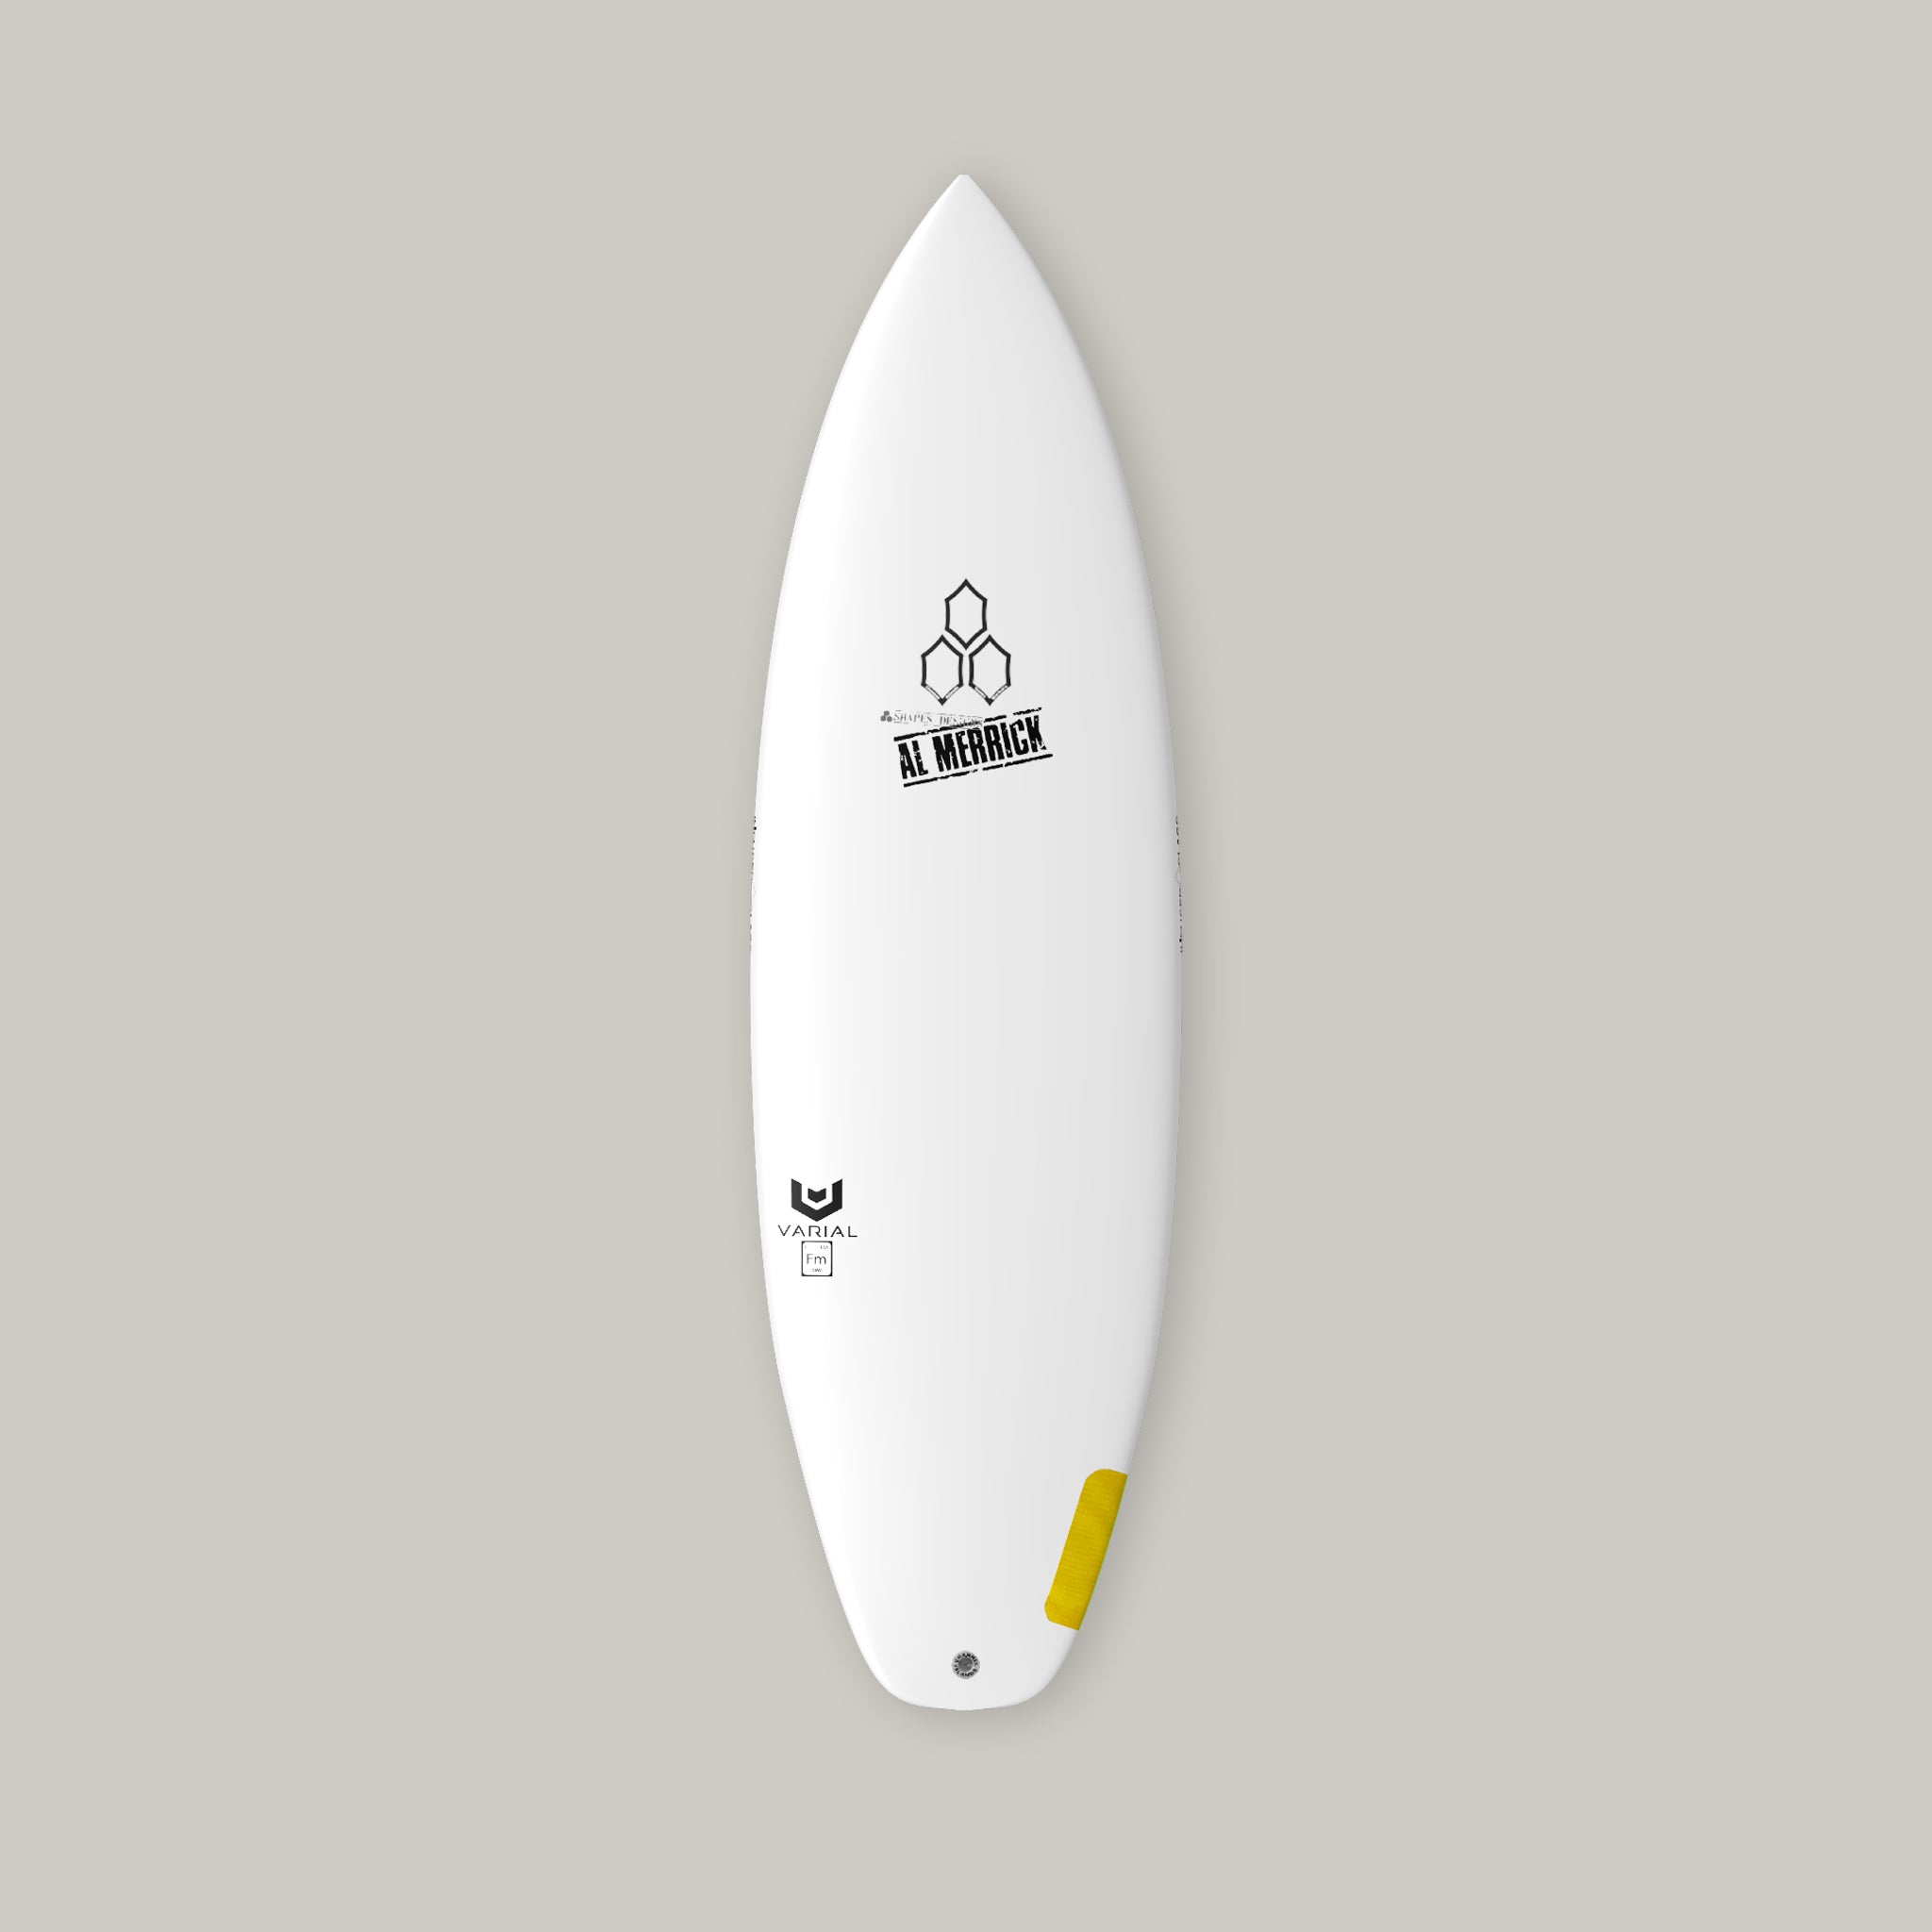 Channel Islands Happy Everyday Surfboard with Varial Surf Technology